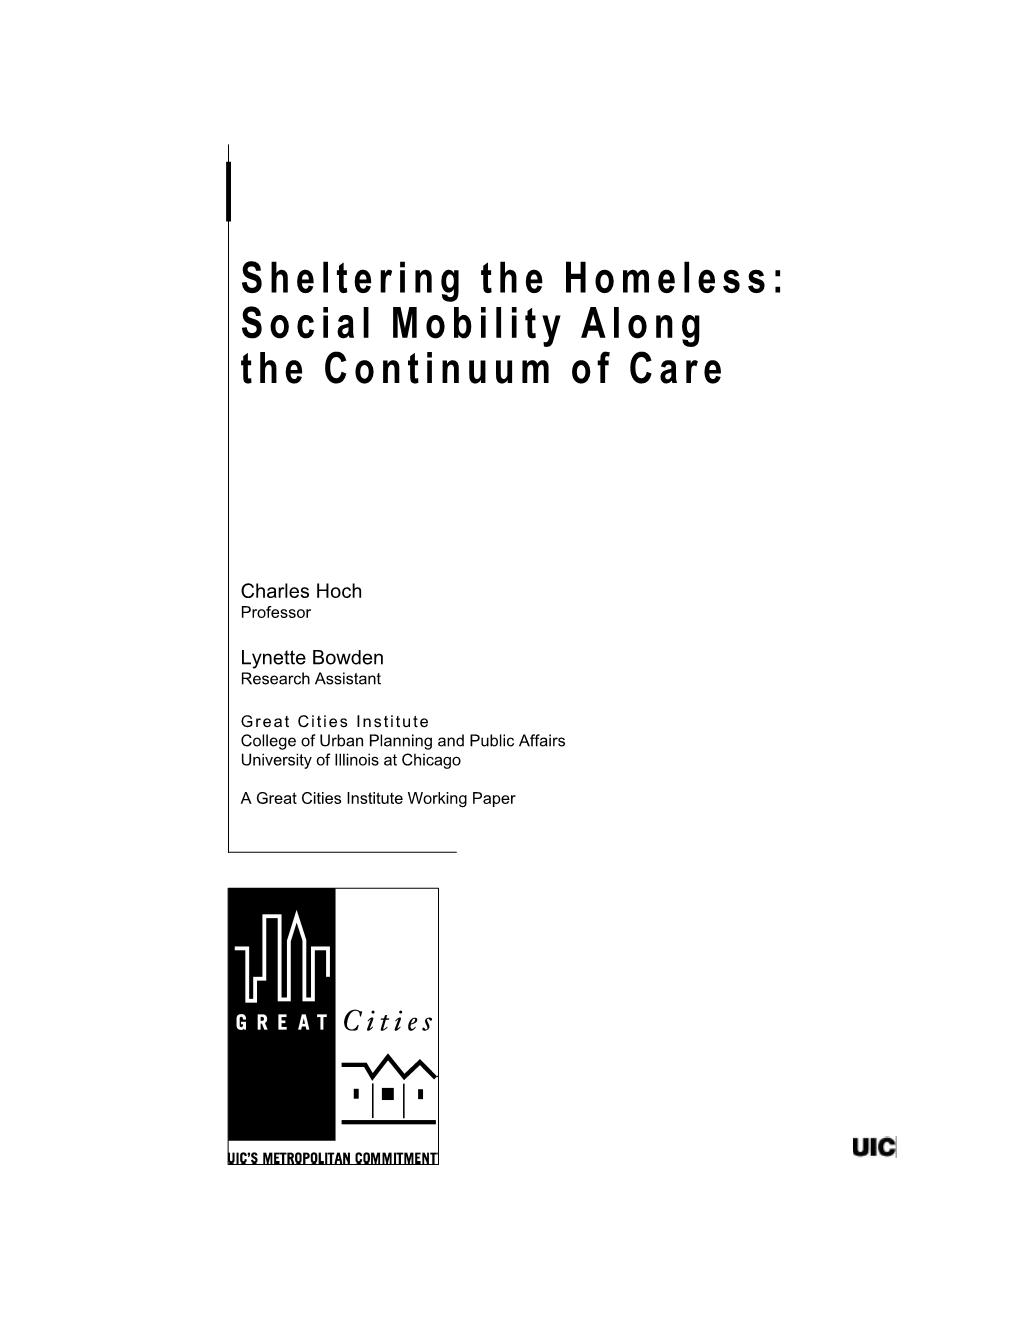 Sheltering the Homeless: Social Mobility Along the Continuum of Care